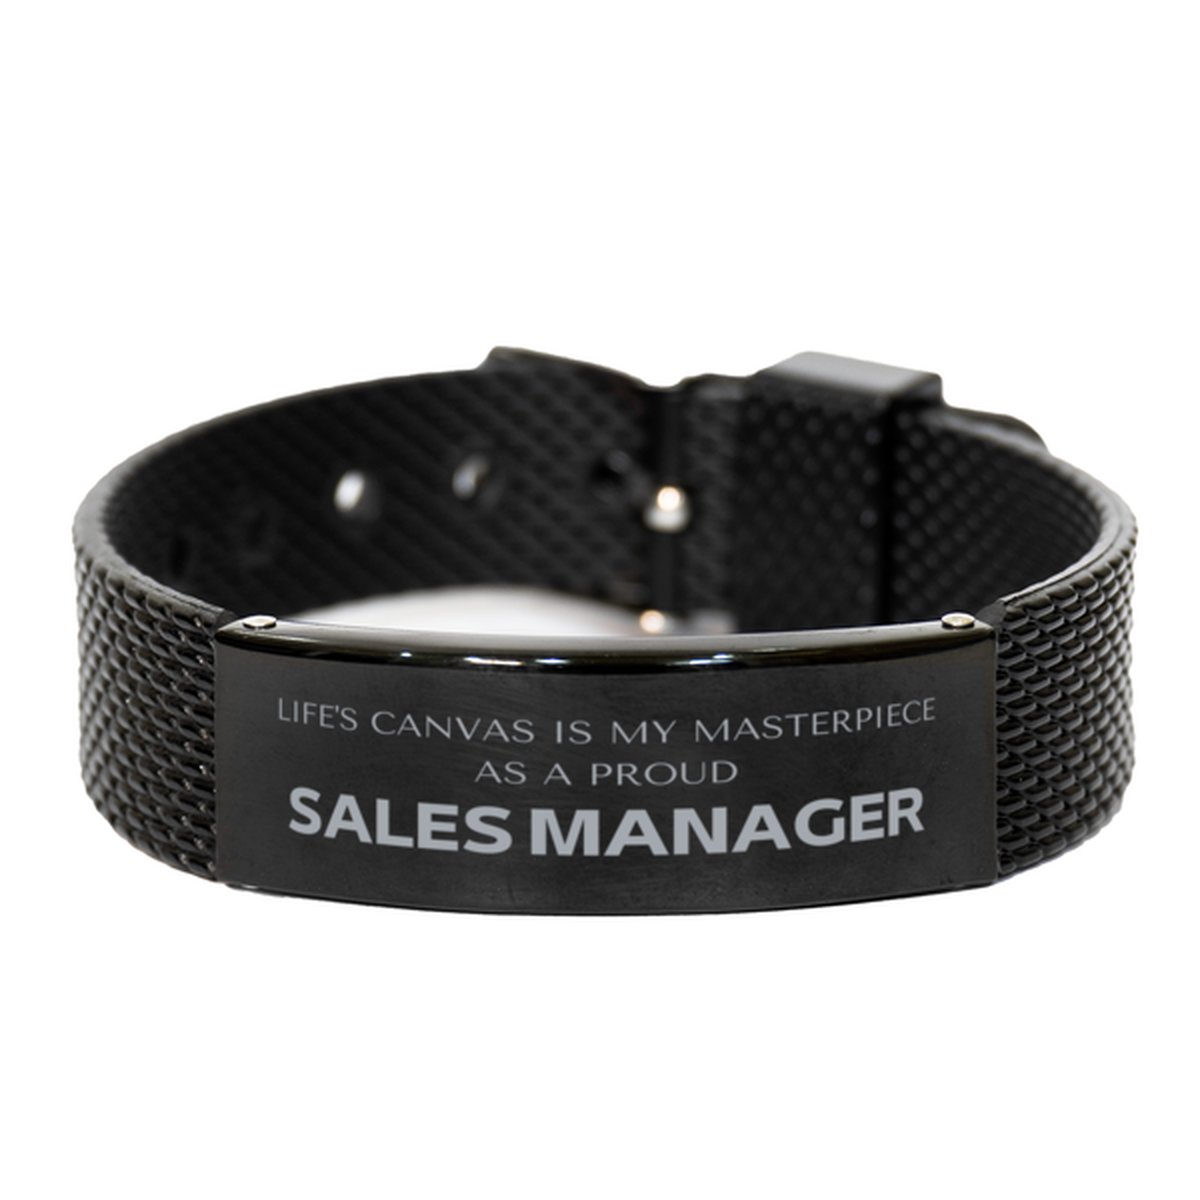 Proud Sales Manager Gifts, Life's canvas is my masterpiece, Epic Birthday Christmas Unique Black Shark Mesh Bracelet For Sales Manager, Coworkers, Men, Women, Friends